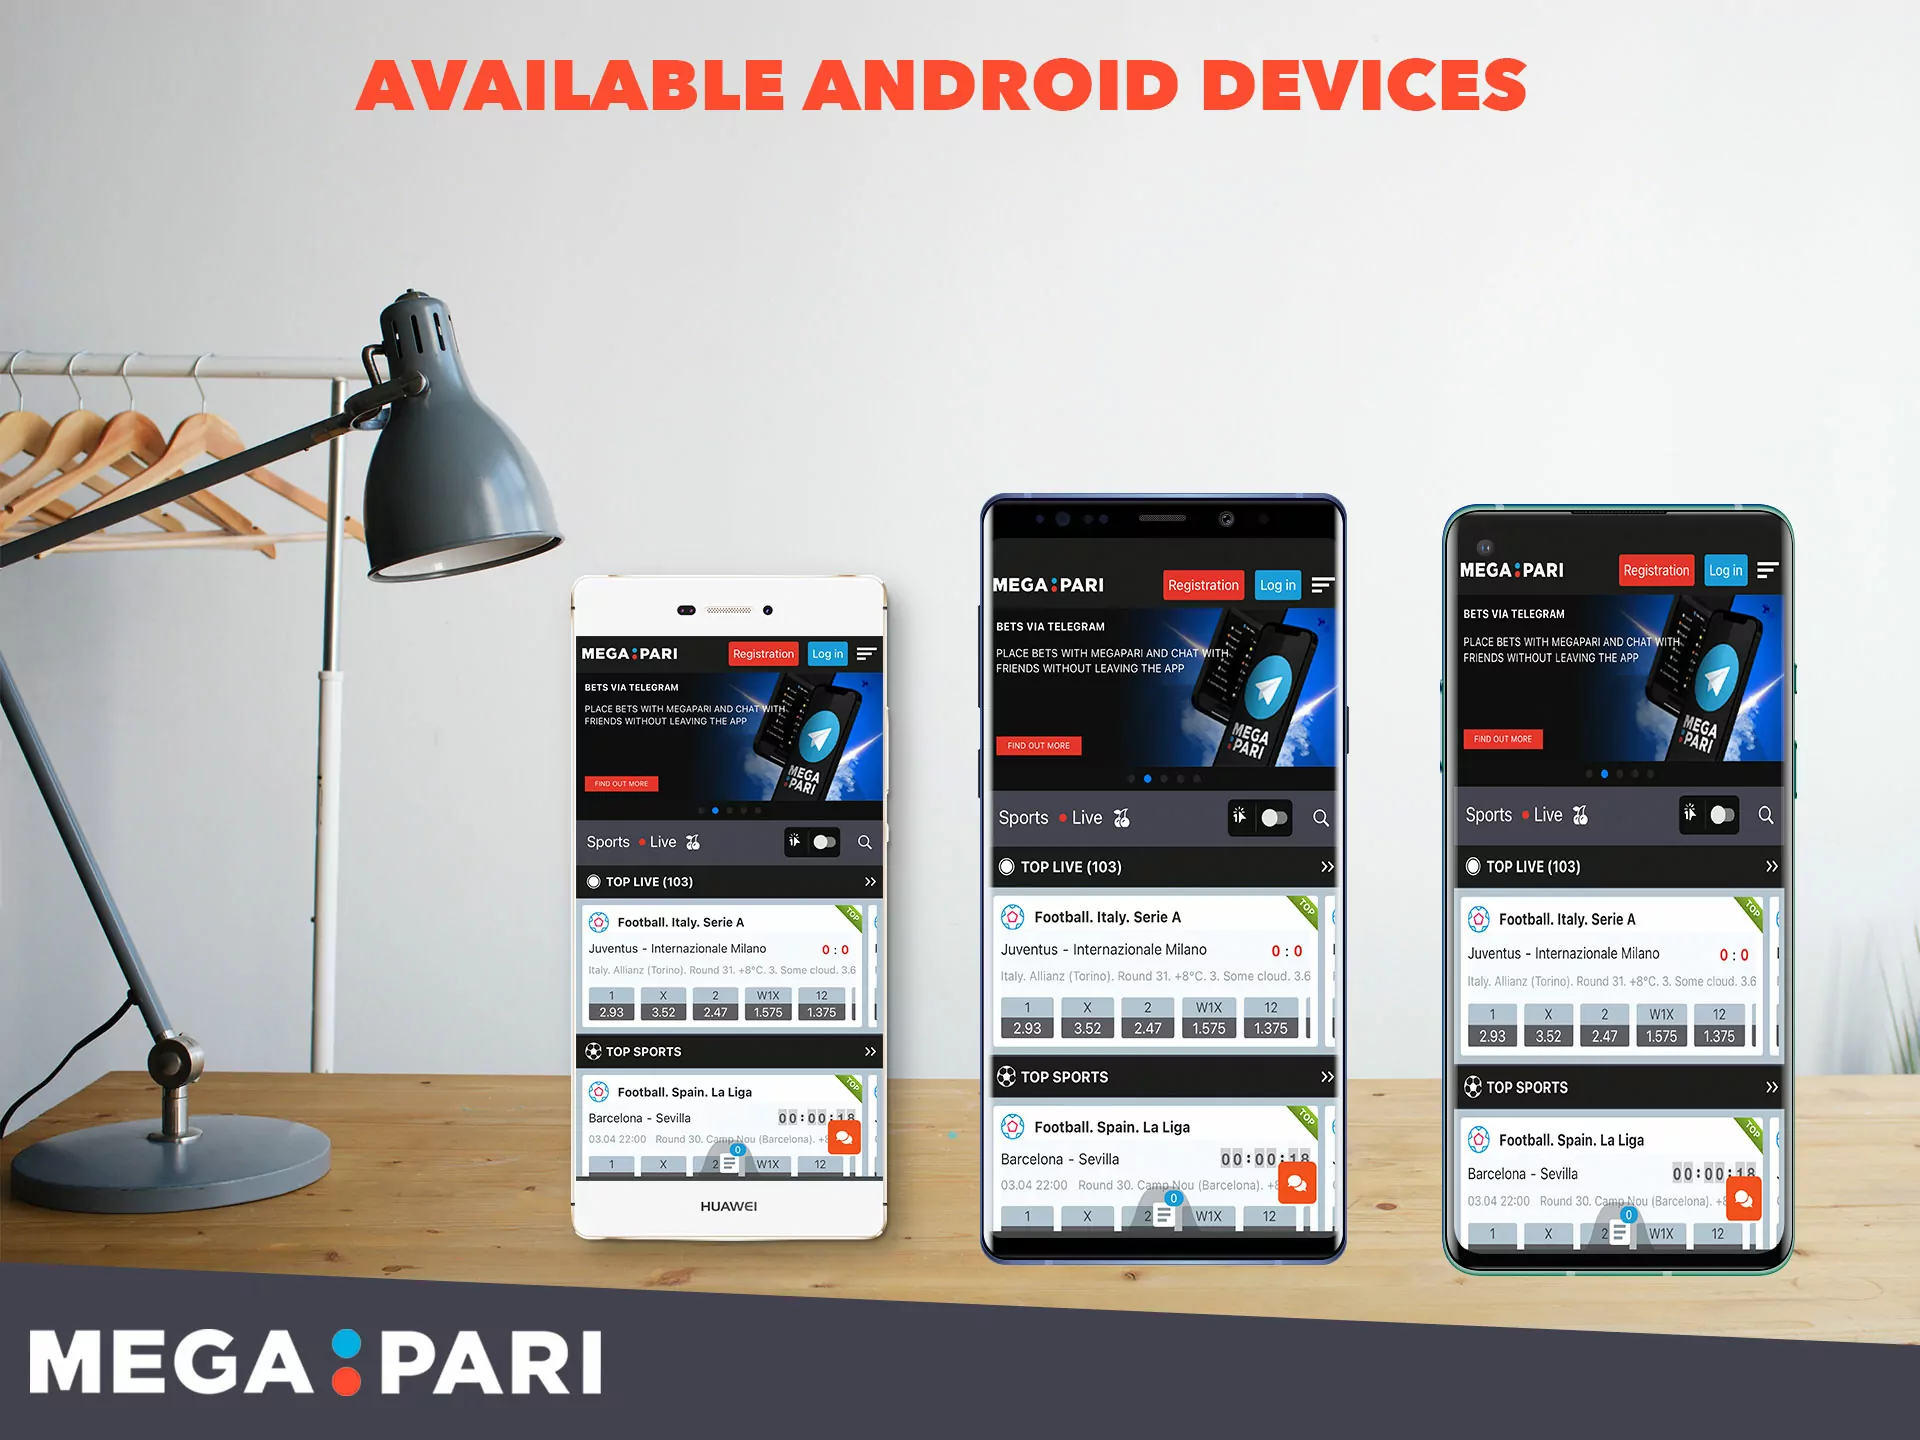 Which Android smartphone models support Megapari app.